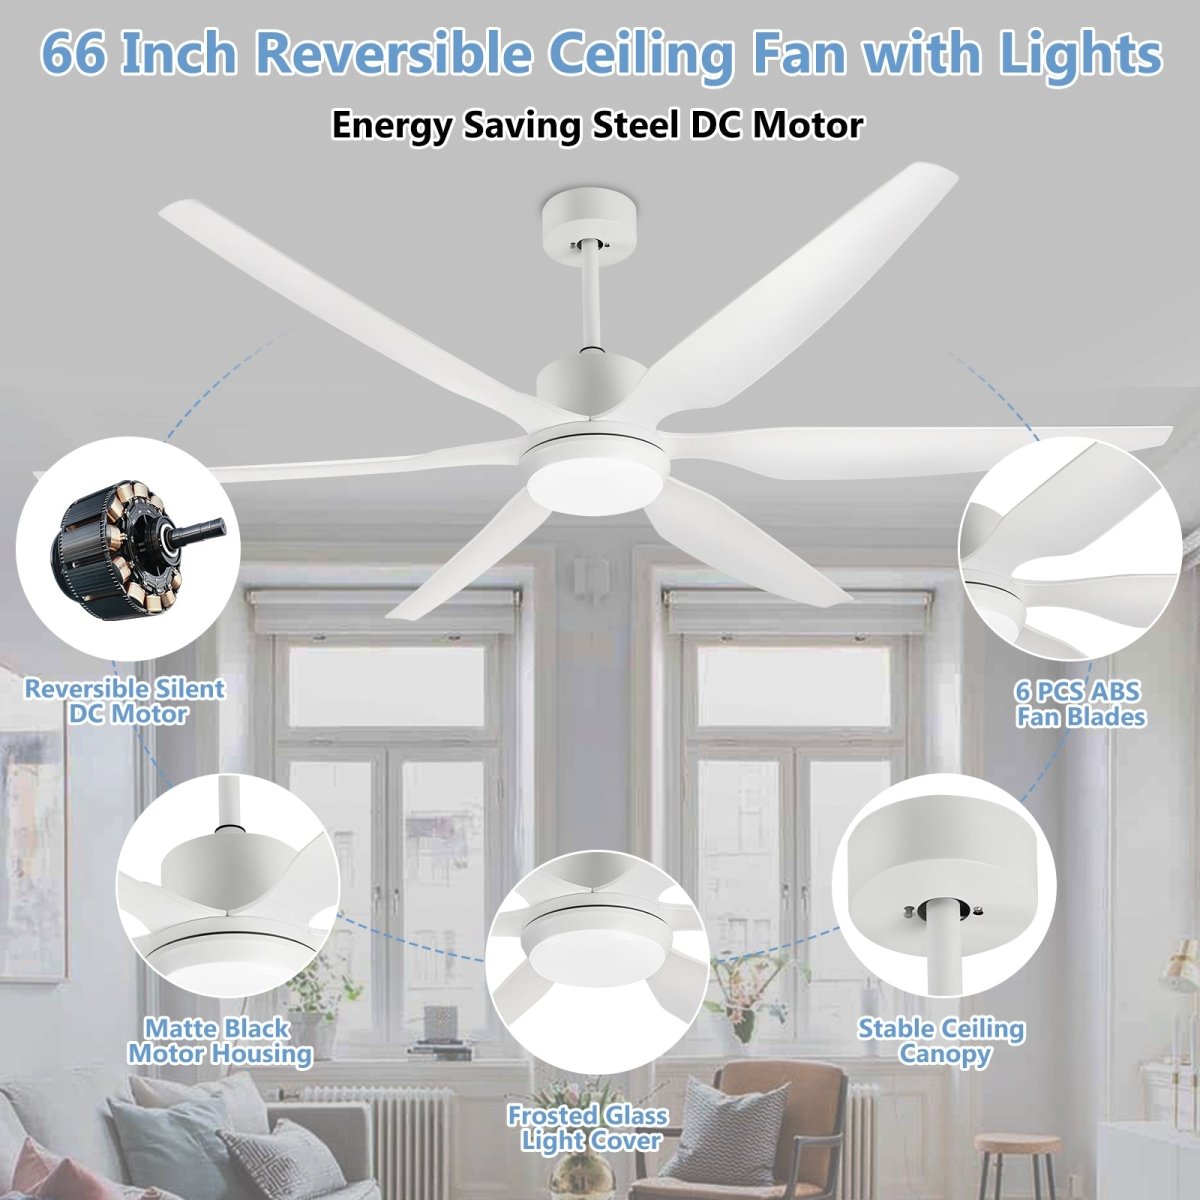 Depuley 66 Inch White Ceiling Fans with Lights Remote Control, 6 Blade Modern Ceiling Fan with Dimmble LED Lights, Indoor and Outdoor for Patio, Living Room, Bedroom, Office, Reversible Quiet DC Motor - WS-FPZ32-12B-WH 3 | DEPULEY